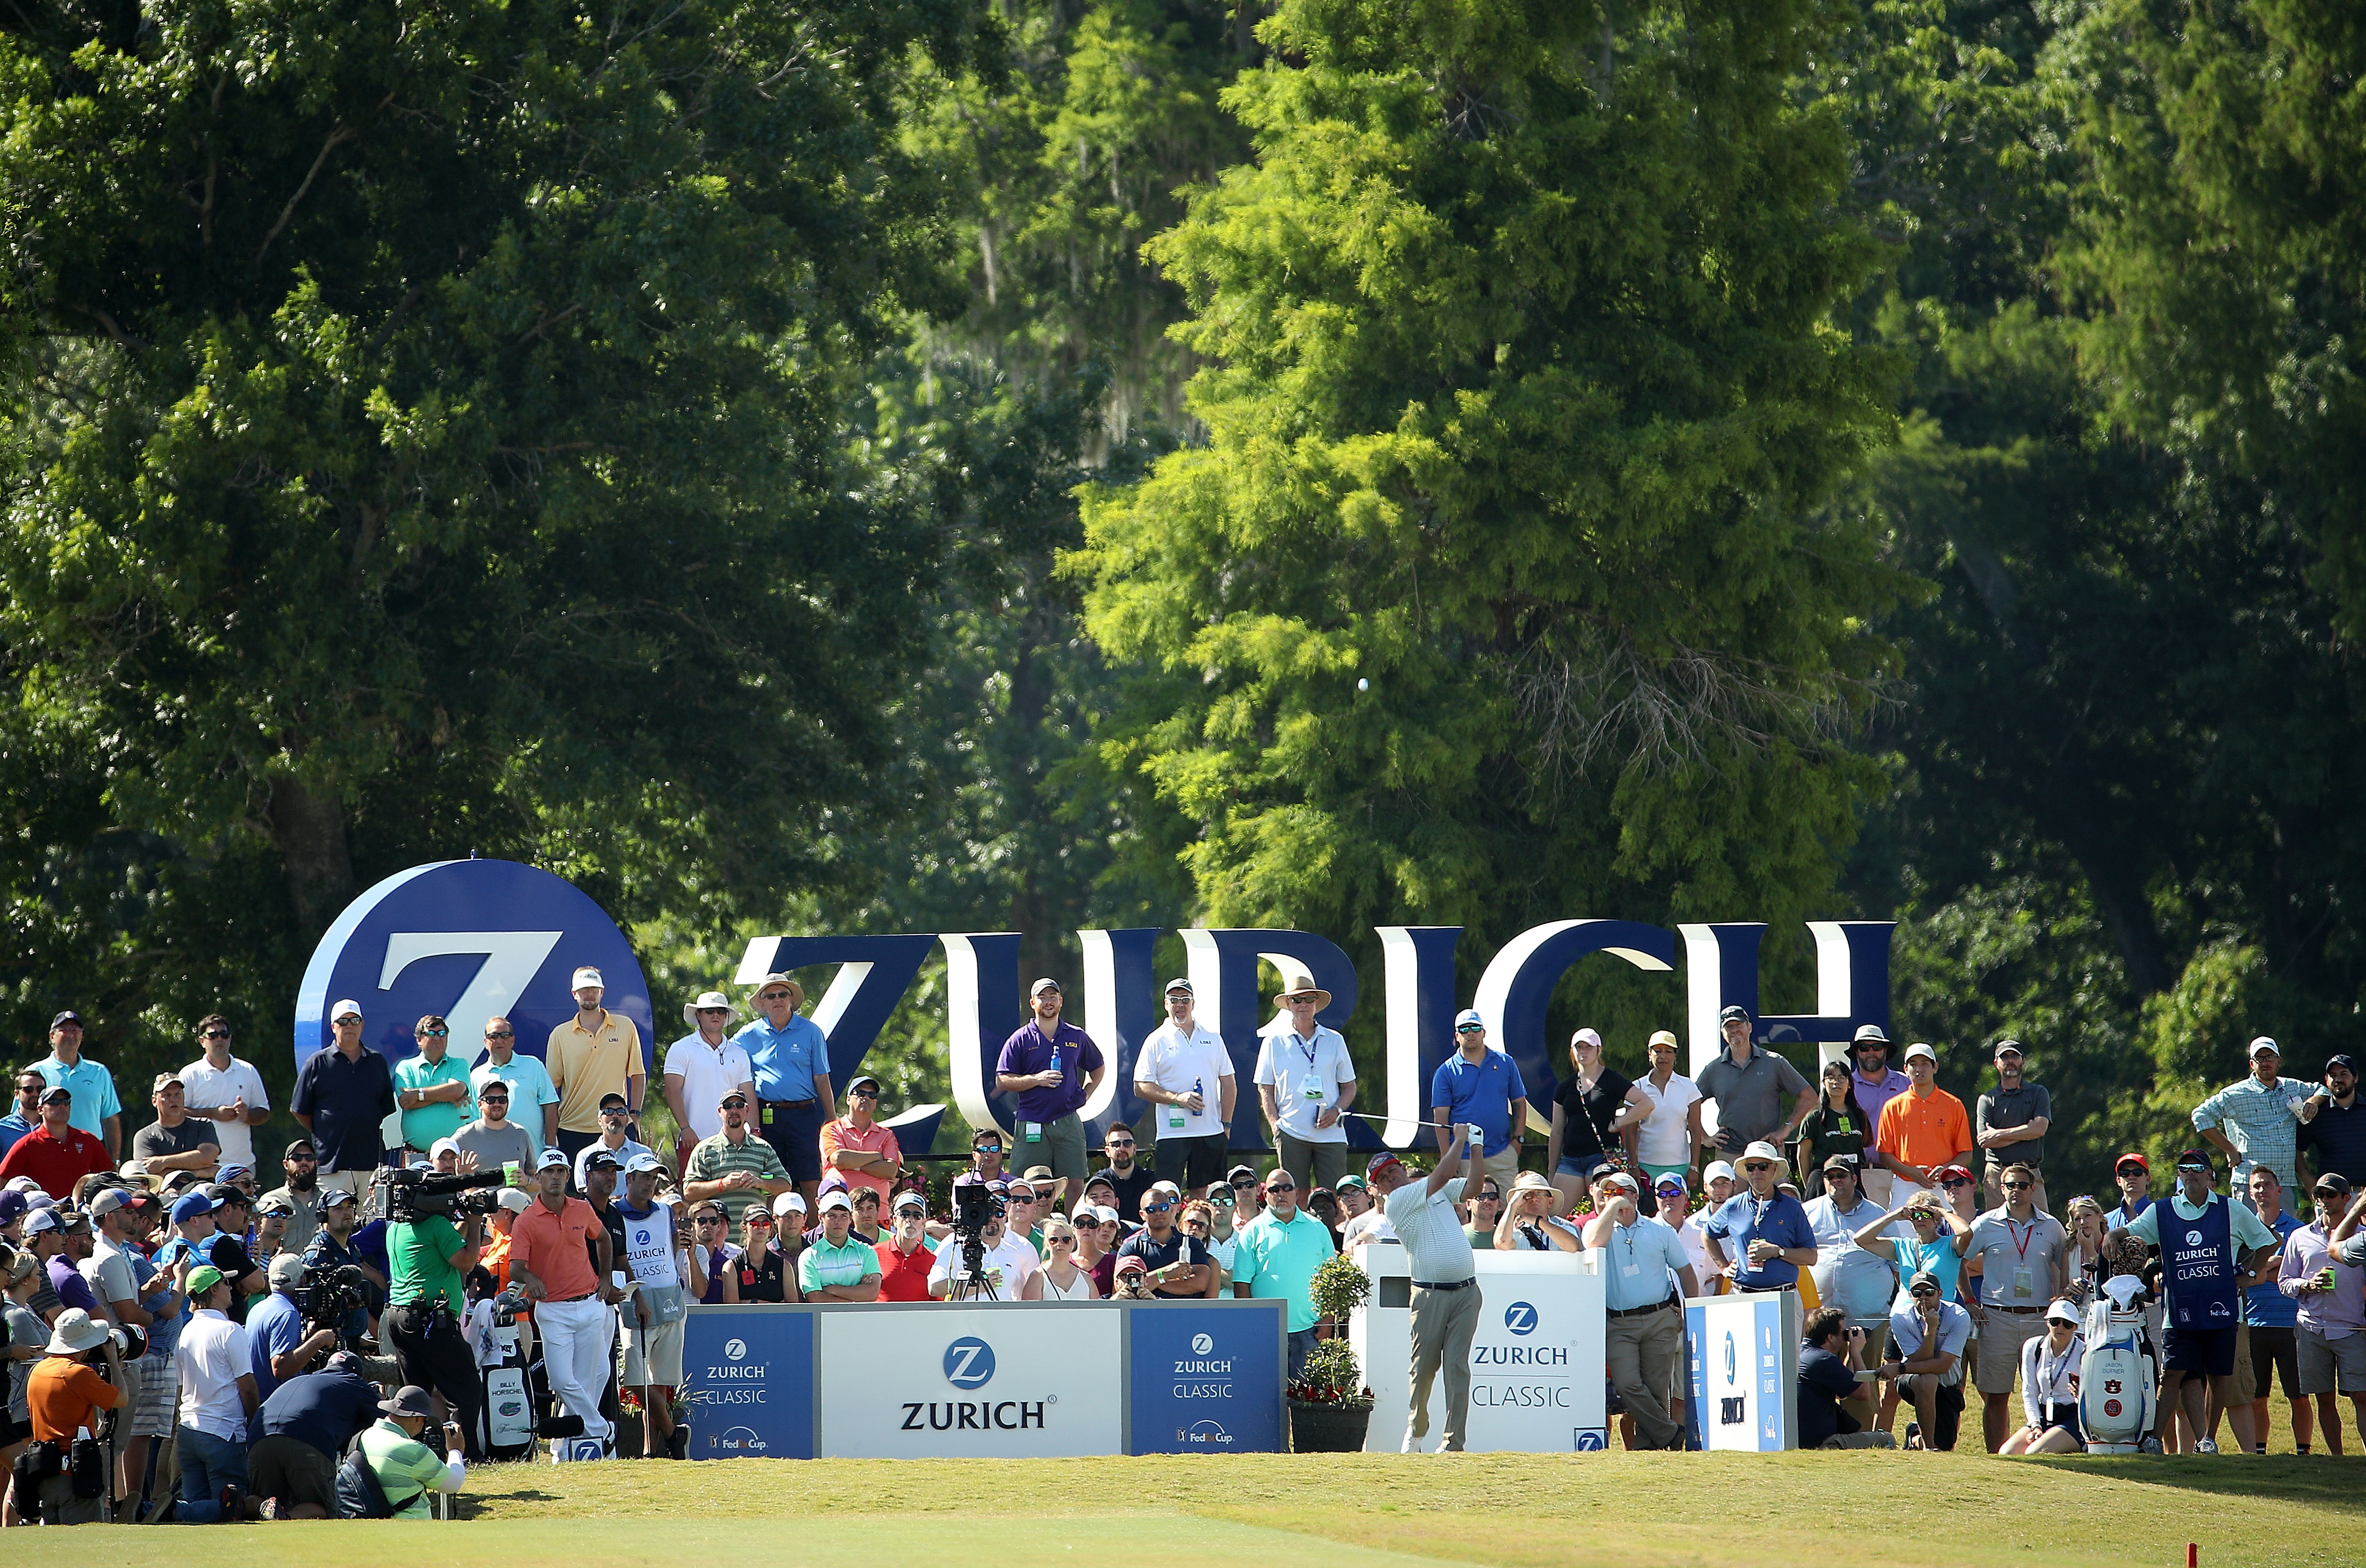 Zurich classic of new orleans field trip